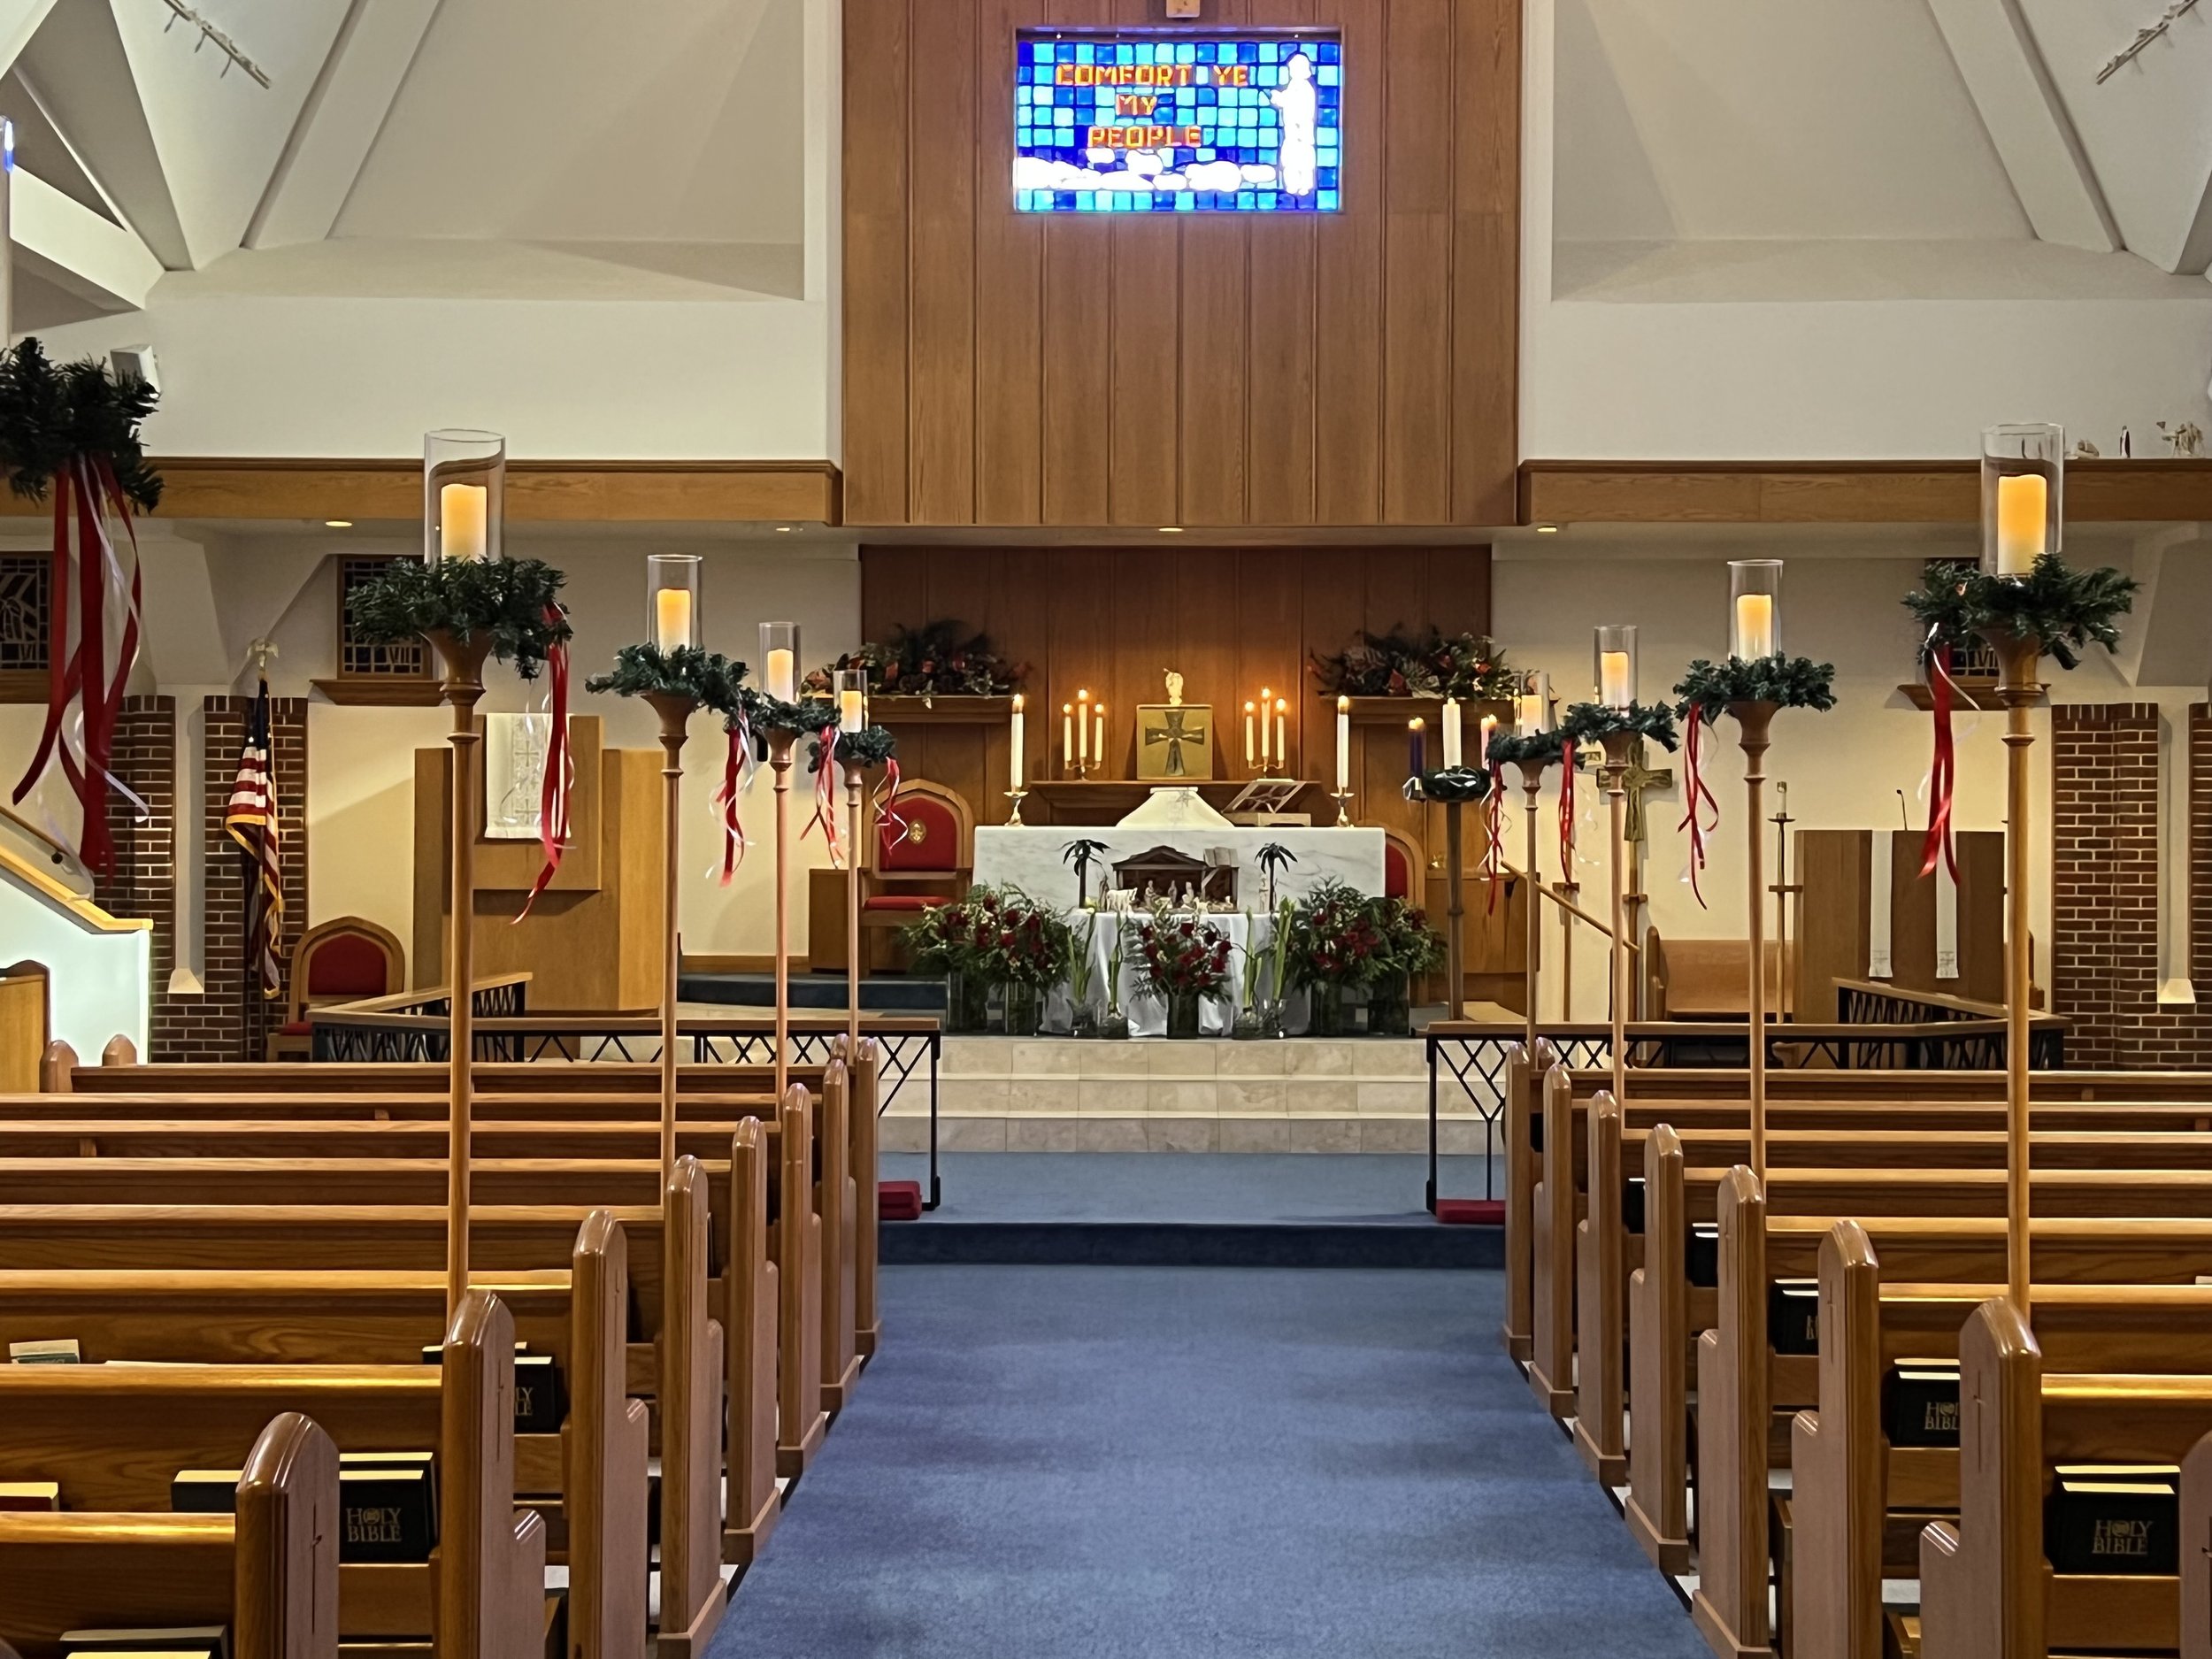 Aisle View of Christmas Altar and Flowers.jpg